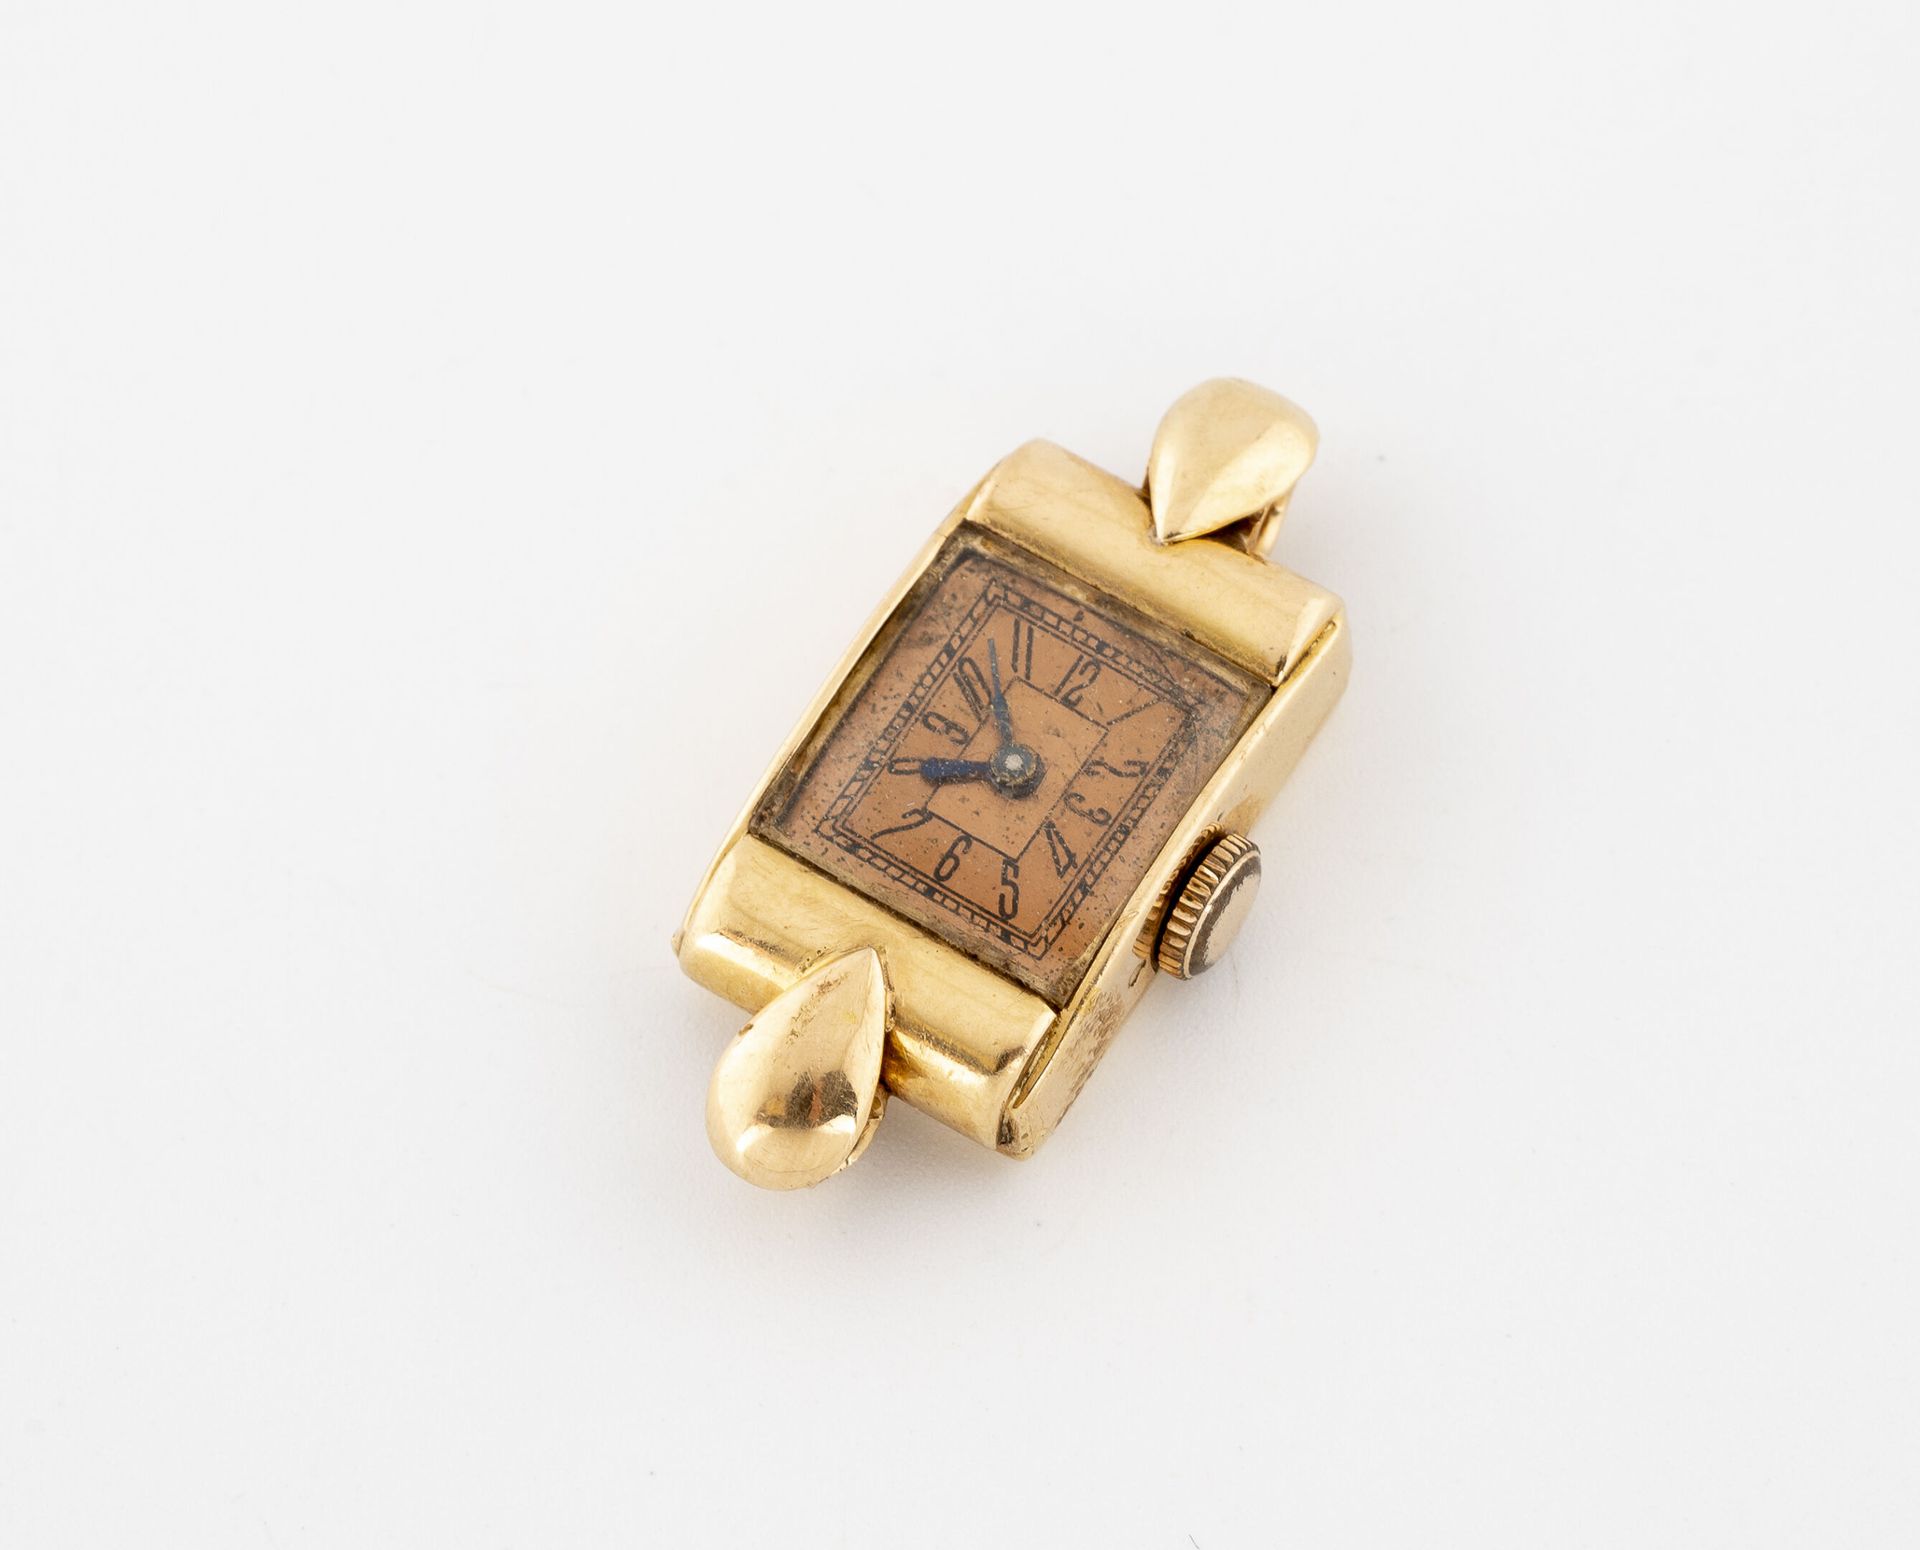 Null Rectangular watch case in yellow gold (750).

Dial with copper background, &hellip;